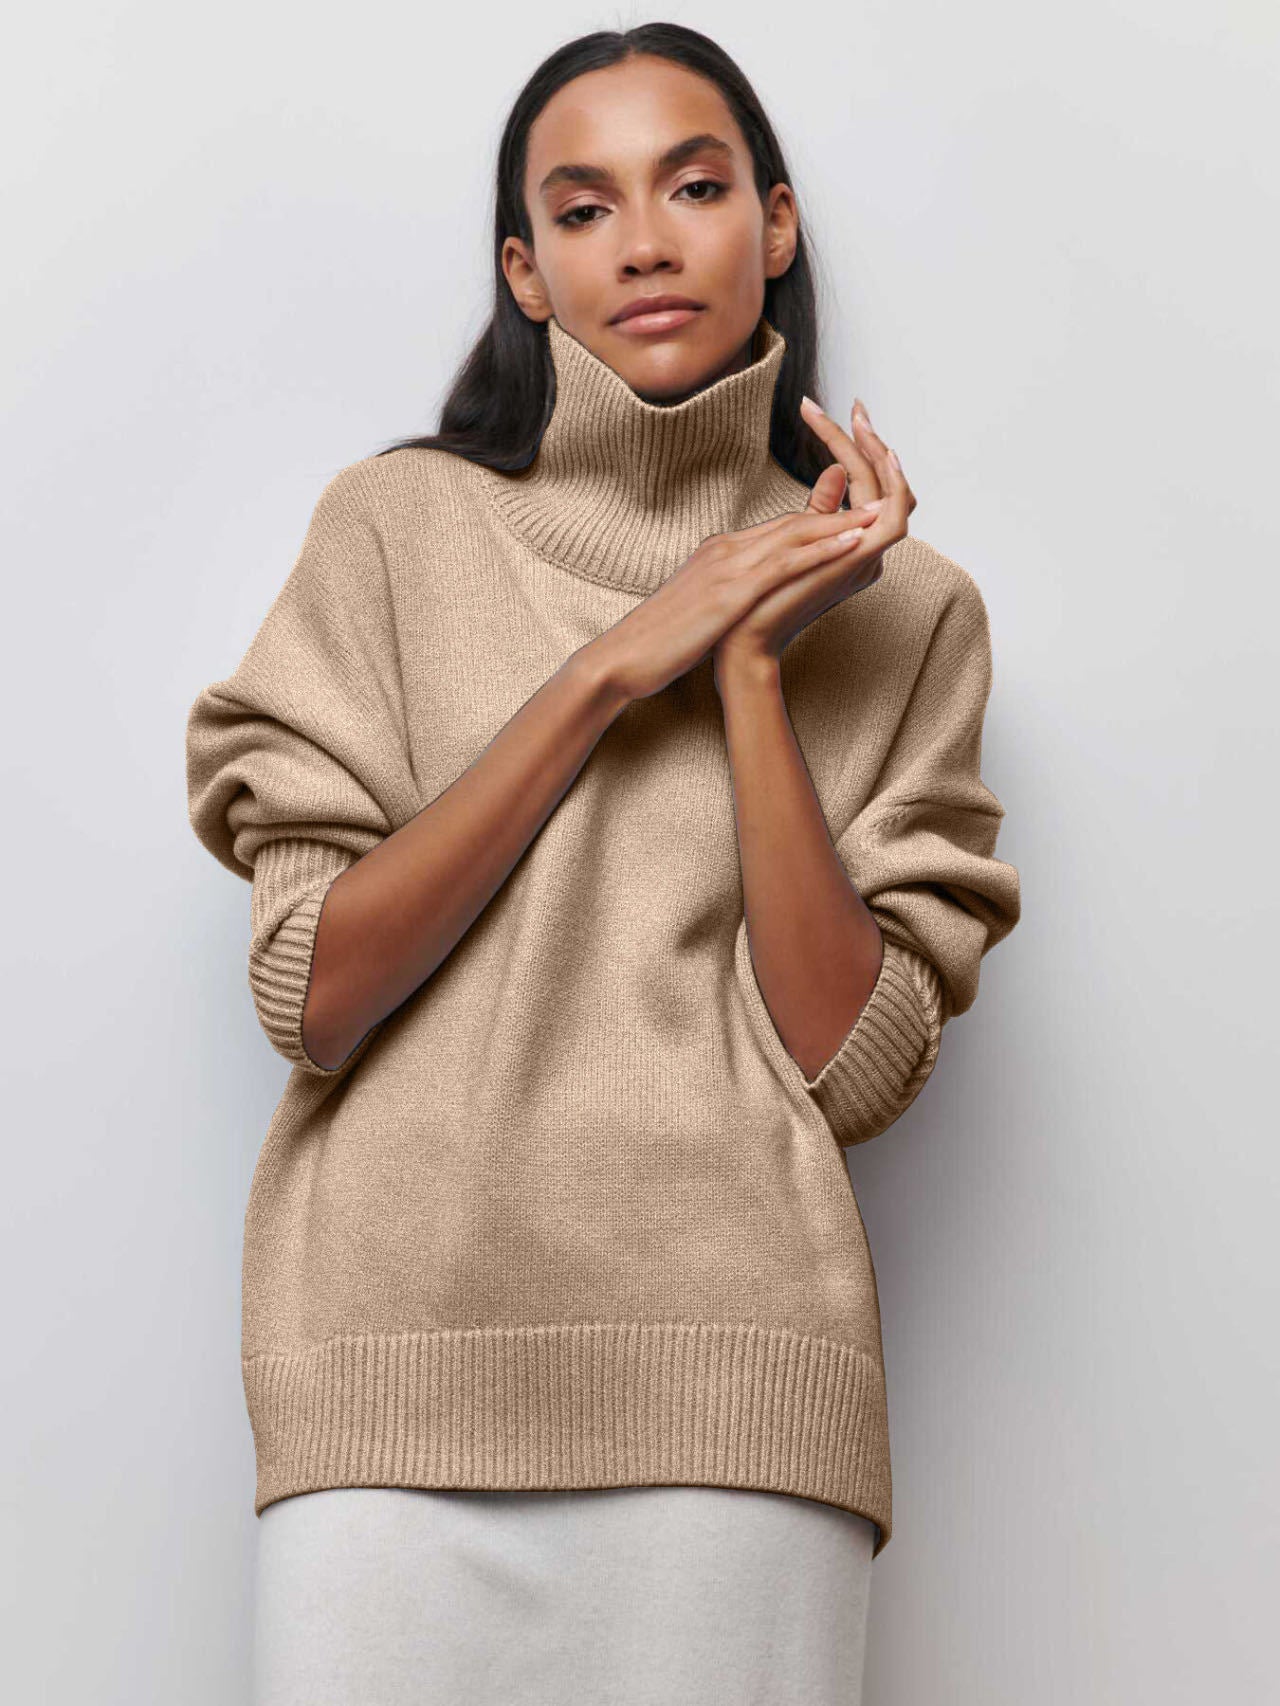 Women's Long-sleeved Pullover Solid Color Sweater